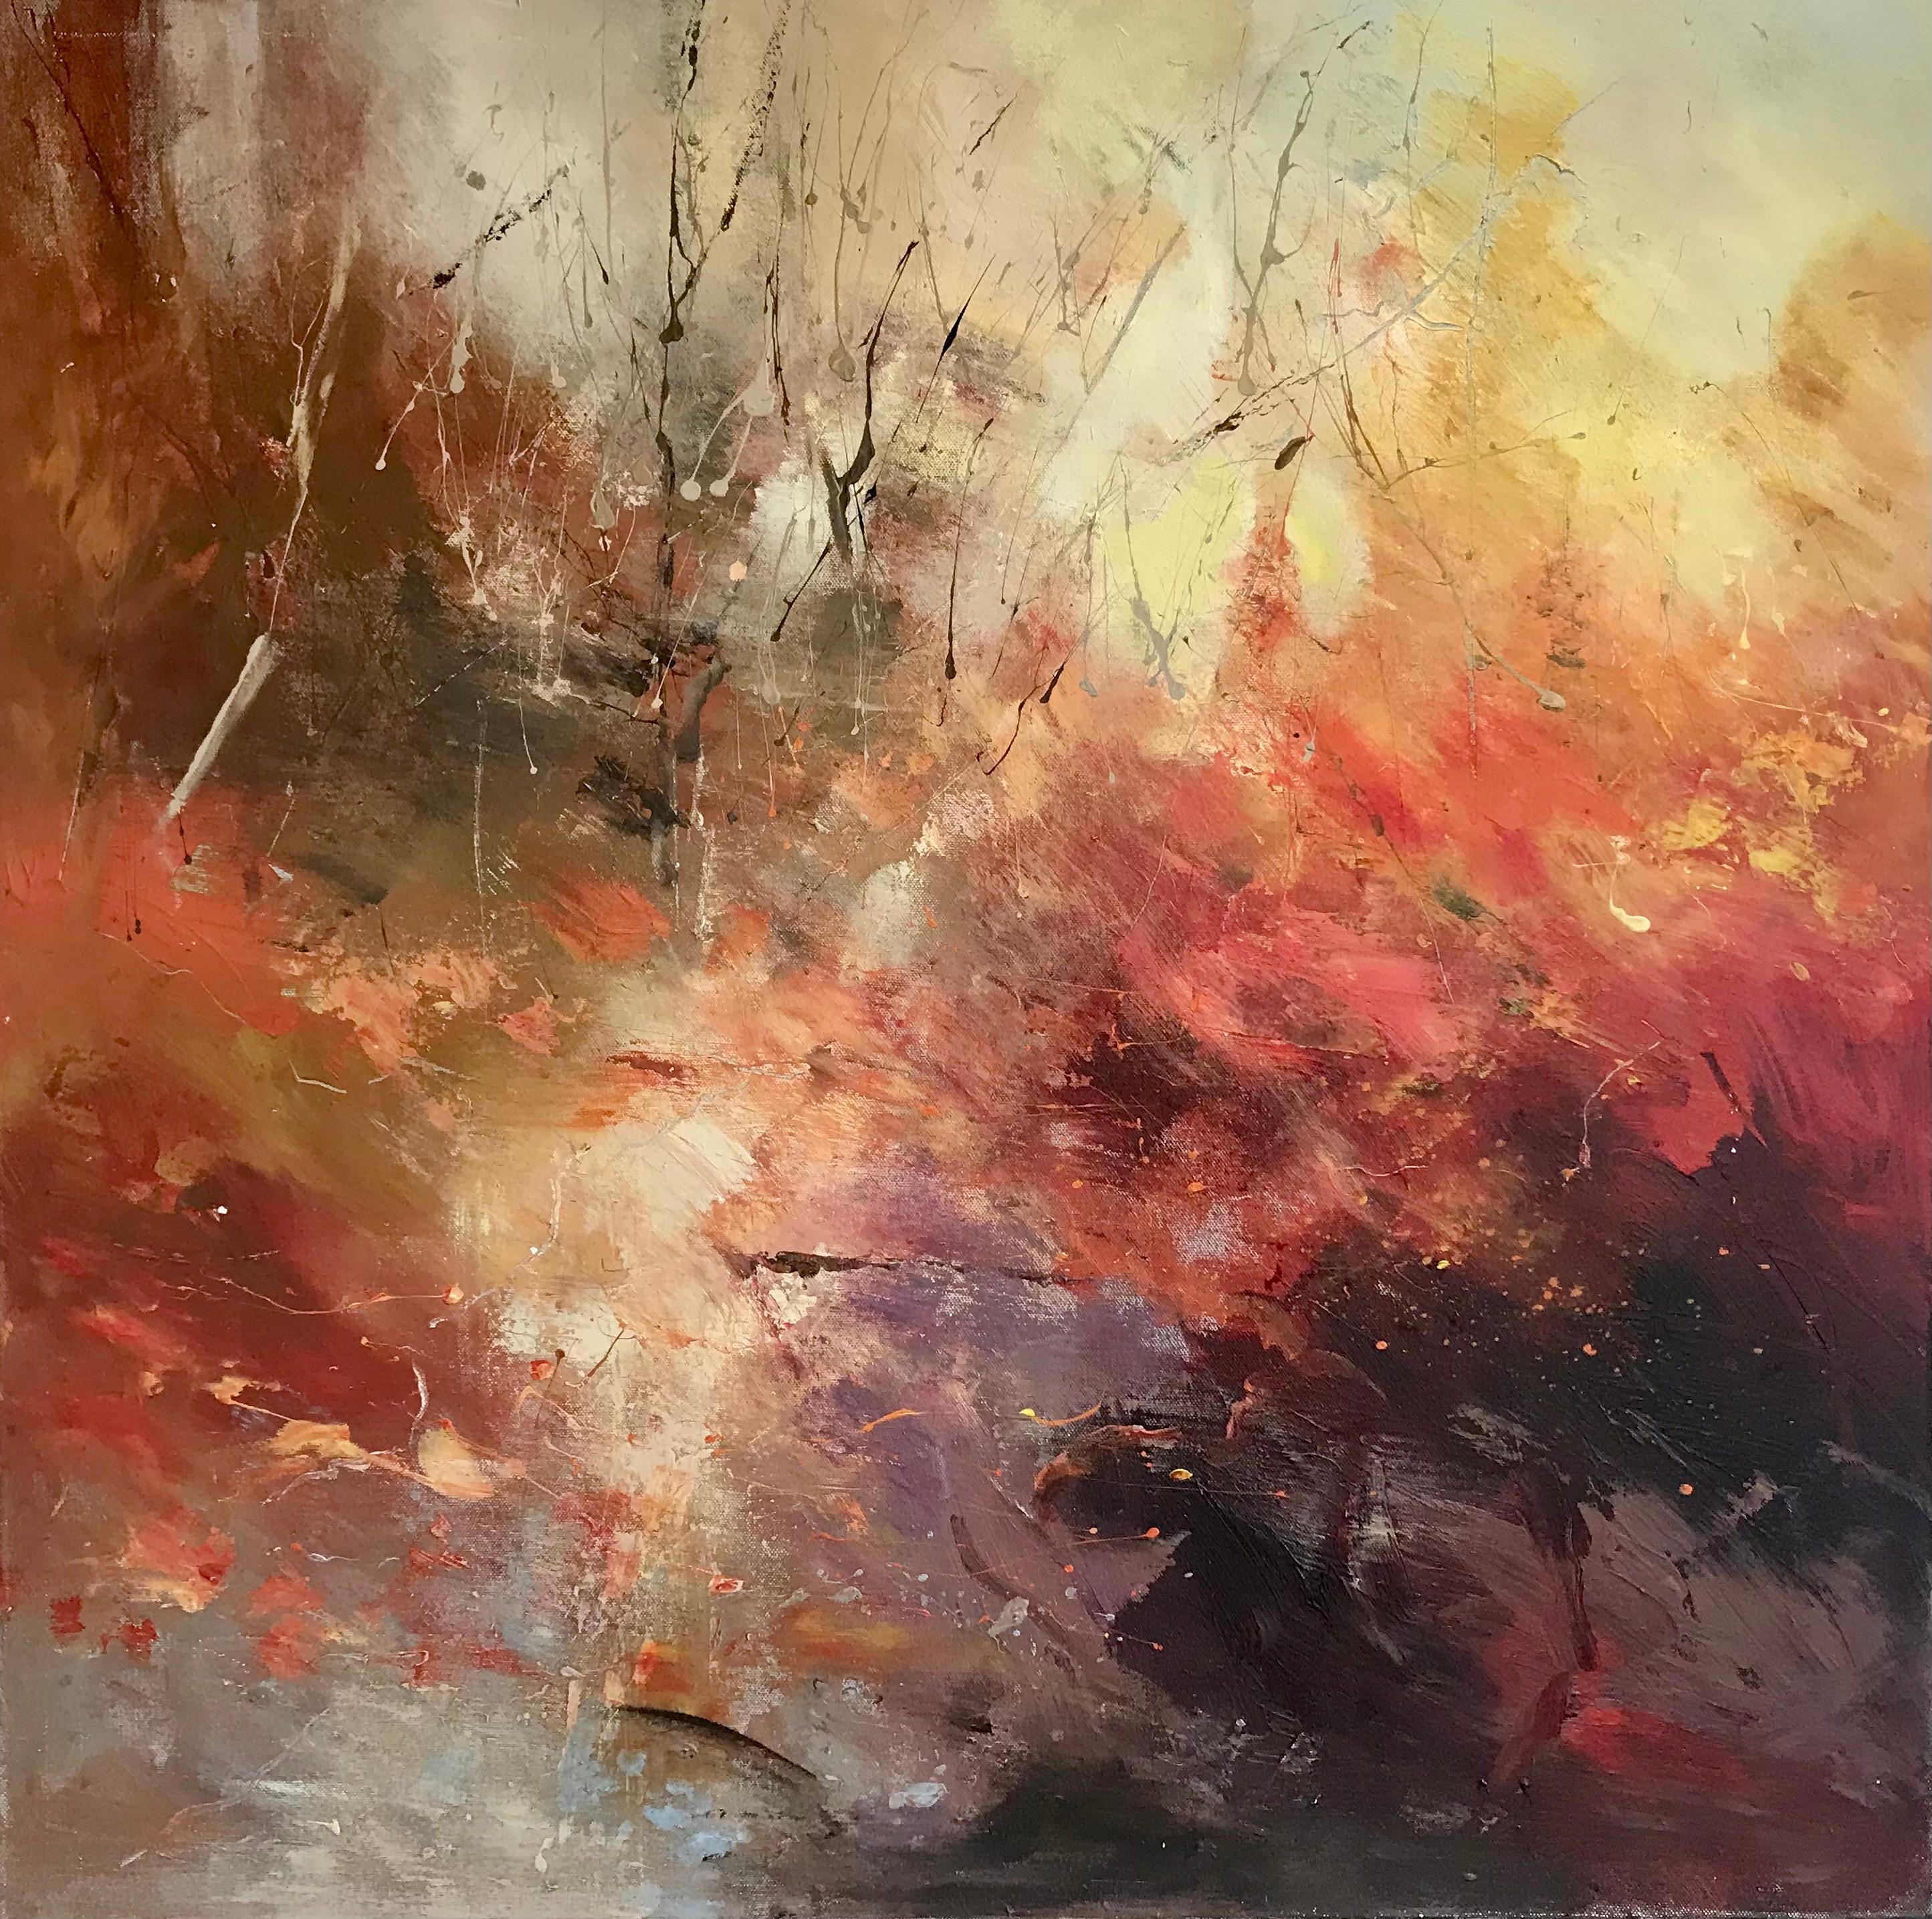 Shaft of Light [2023}

Shaft of Light is an original abstract painting by Claire Wiltshire. Oil paint on canvas.

Additional information:
Original painting
Oil and mixed media on canvas
Image Size: H:80 cm x W:80 cm
Complete Size of Unframed Work: